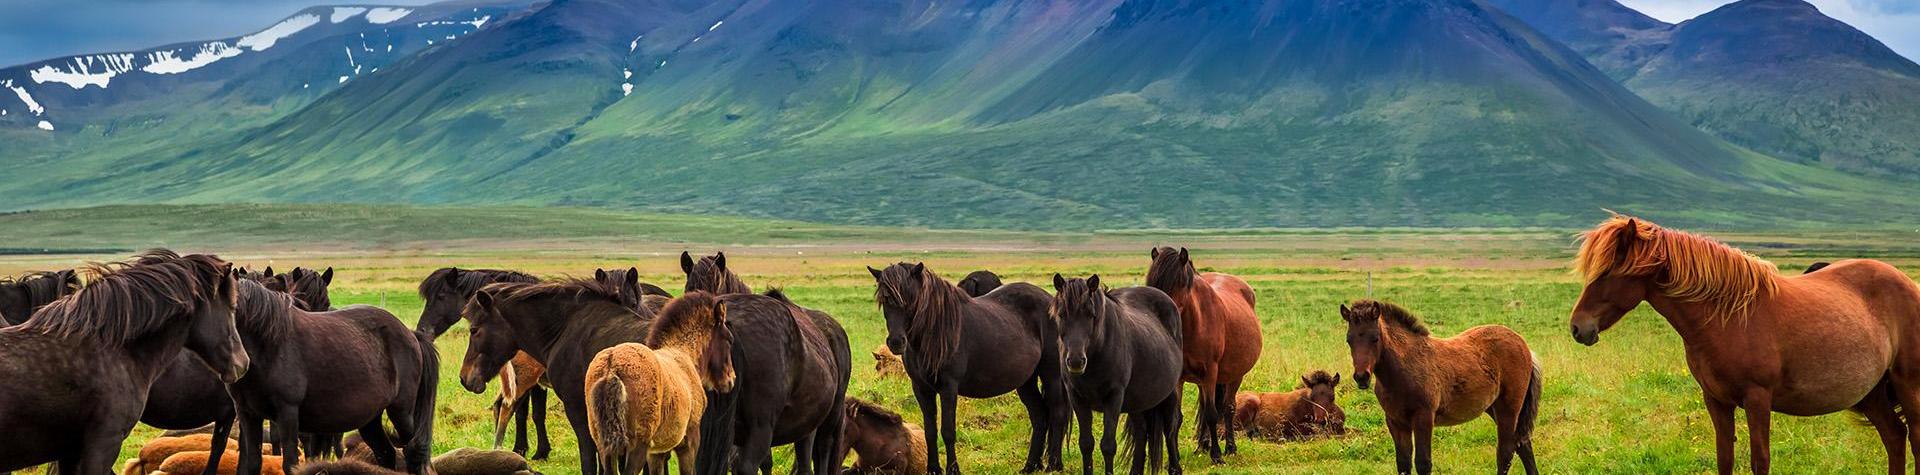 Horses in nature, Iceland.